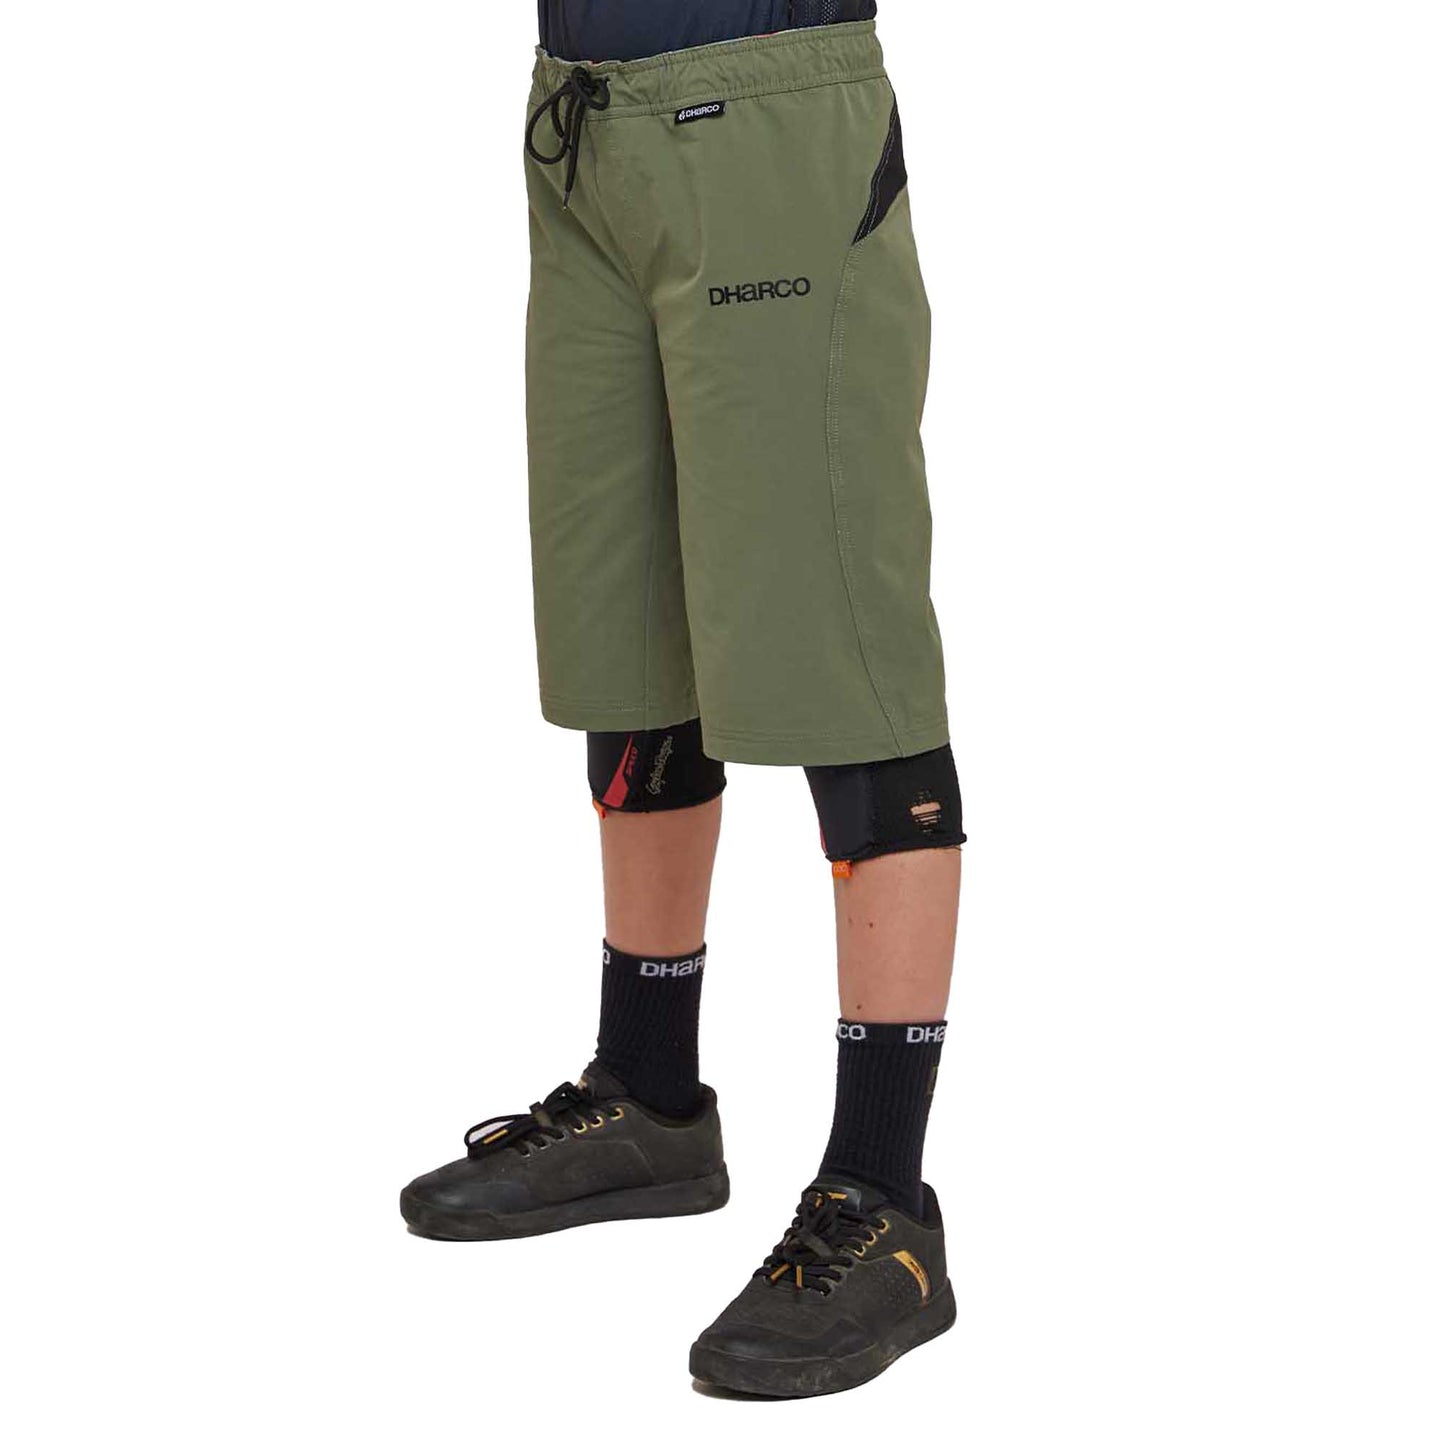 DHaRCO Youth Gravity Shorts - Youth 2XL - Gorilla Green